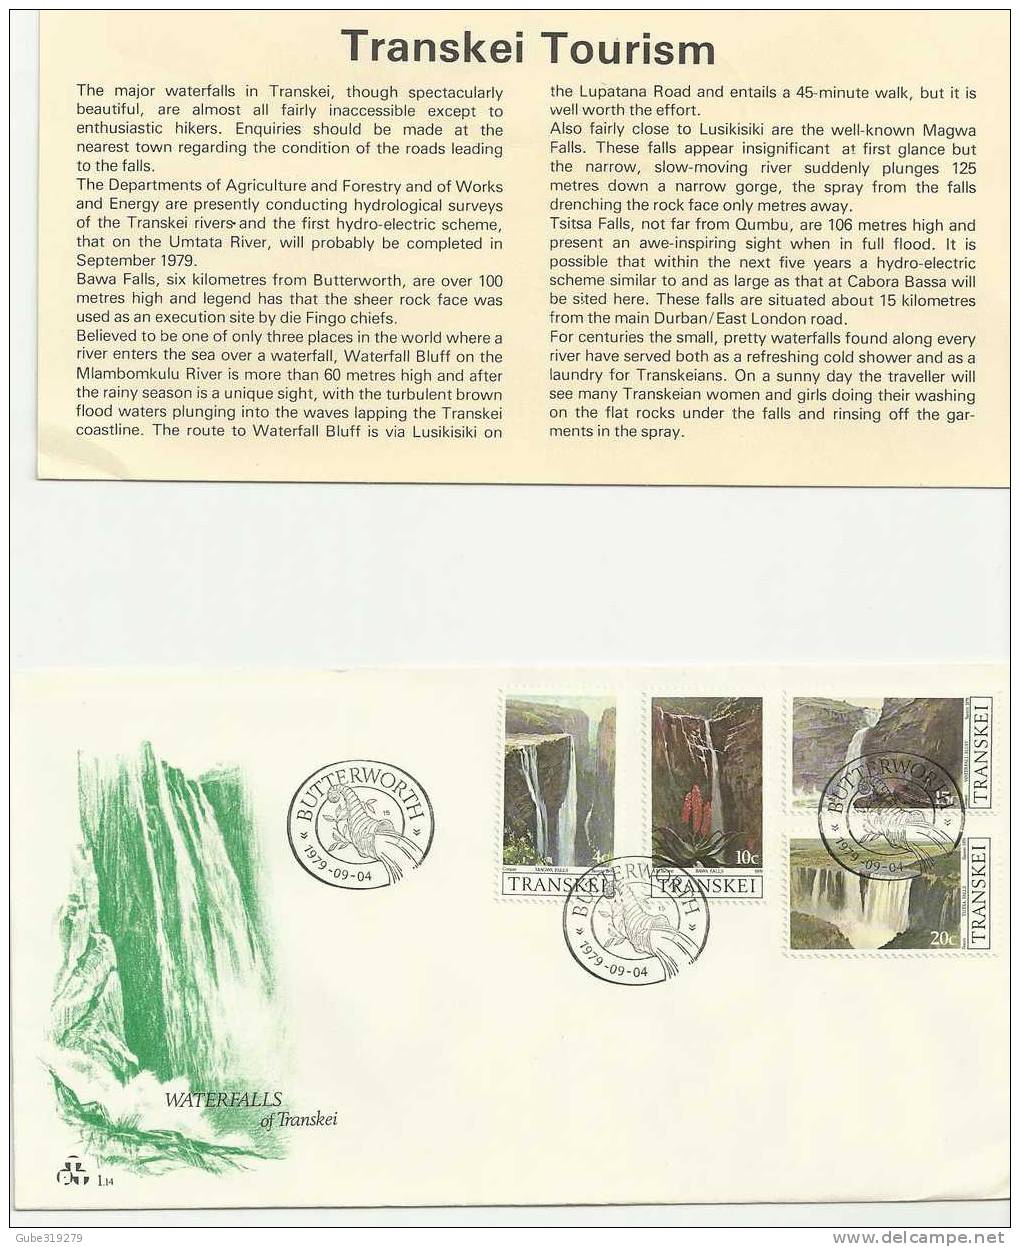 TRANSKEI-1979- 1 PIECE FDC WATERFALLS  TRANSKEI  - 04 SEPT 1979  WITH 4 STAMPS OF 4-10-15-20  CENTS  - REF.08 - Transkei